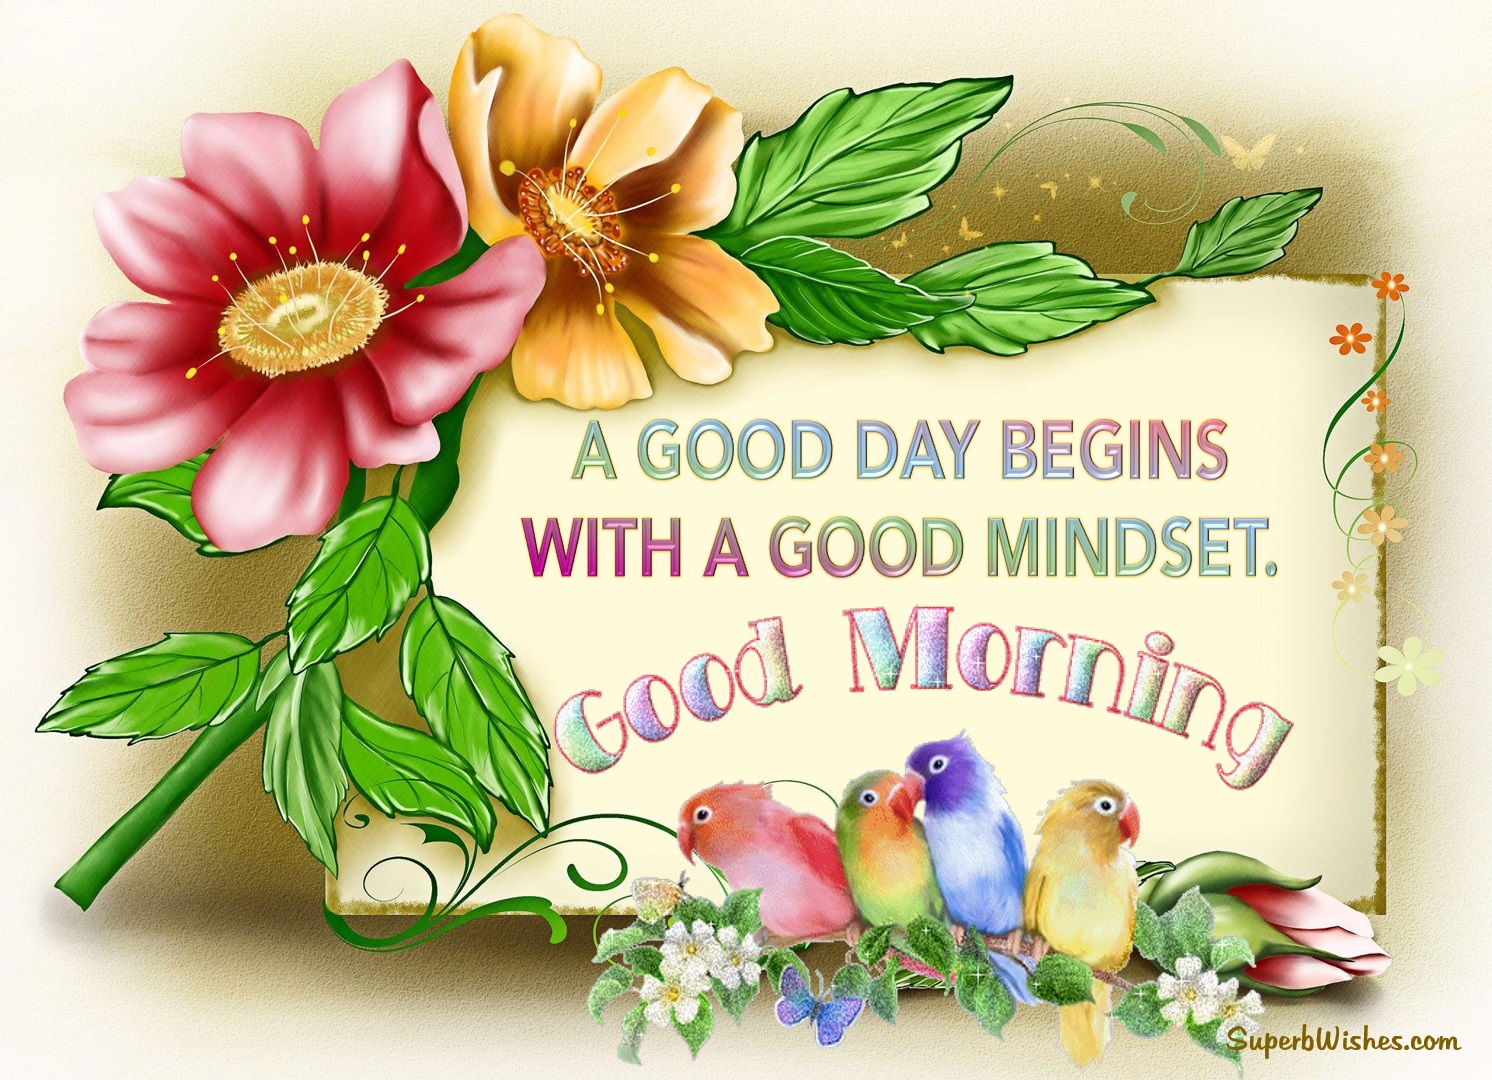 Good Morning Wishes For Friends Images – Good Day | SuperbWishes